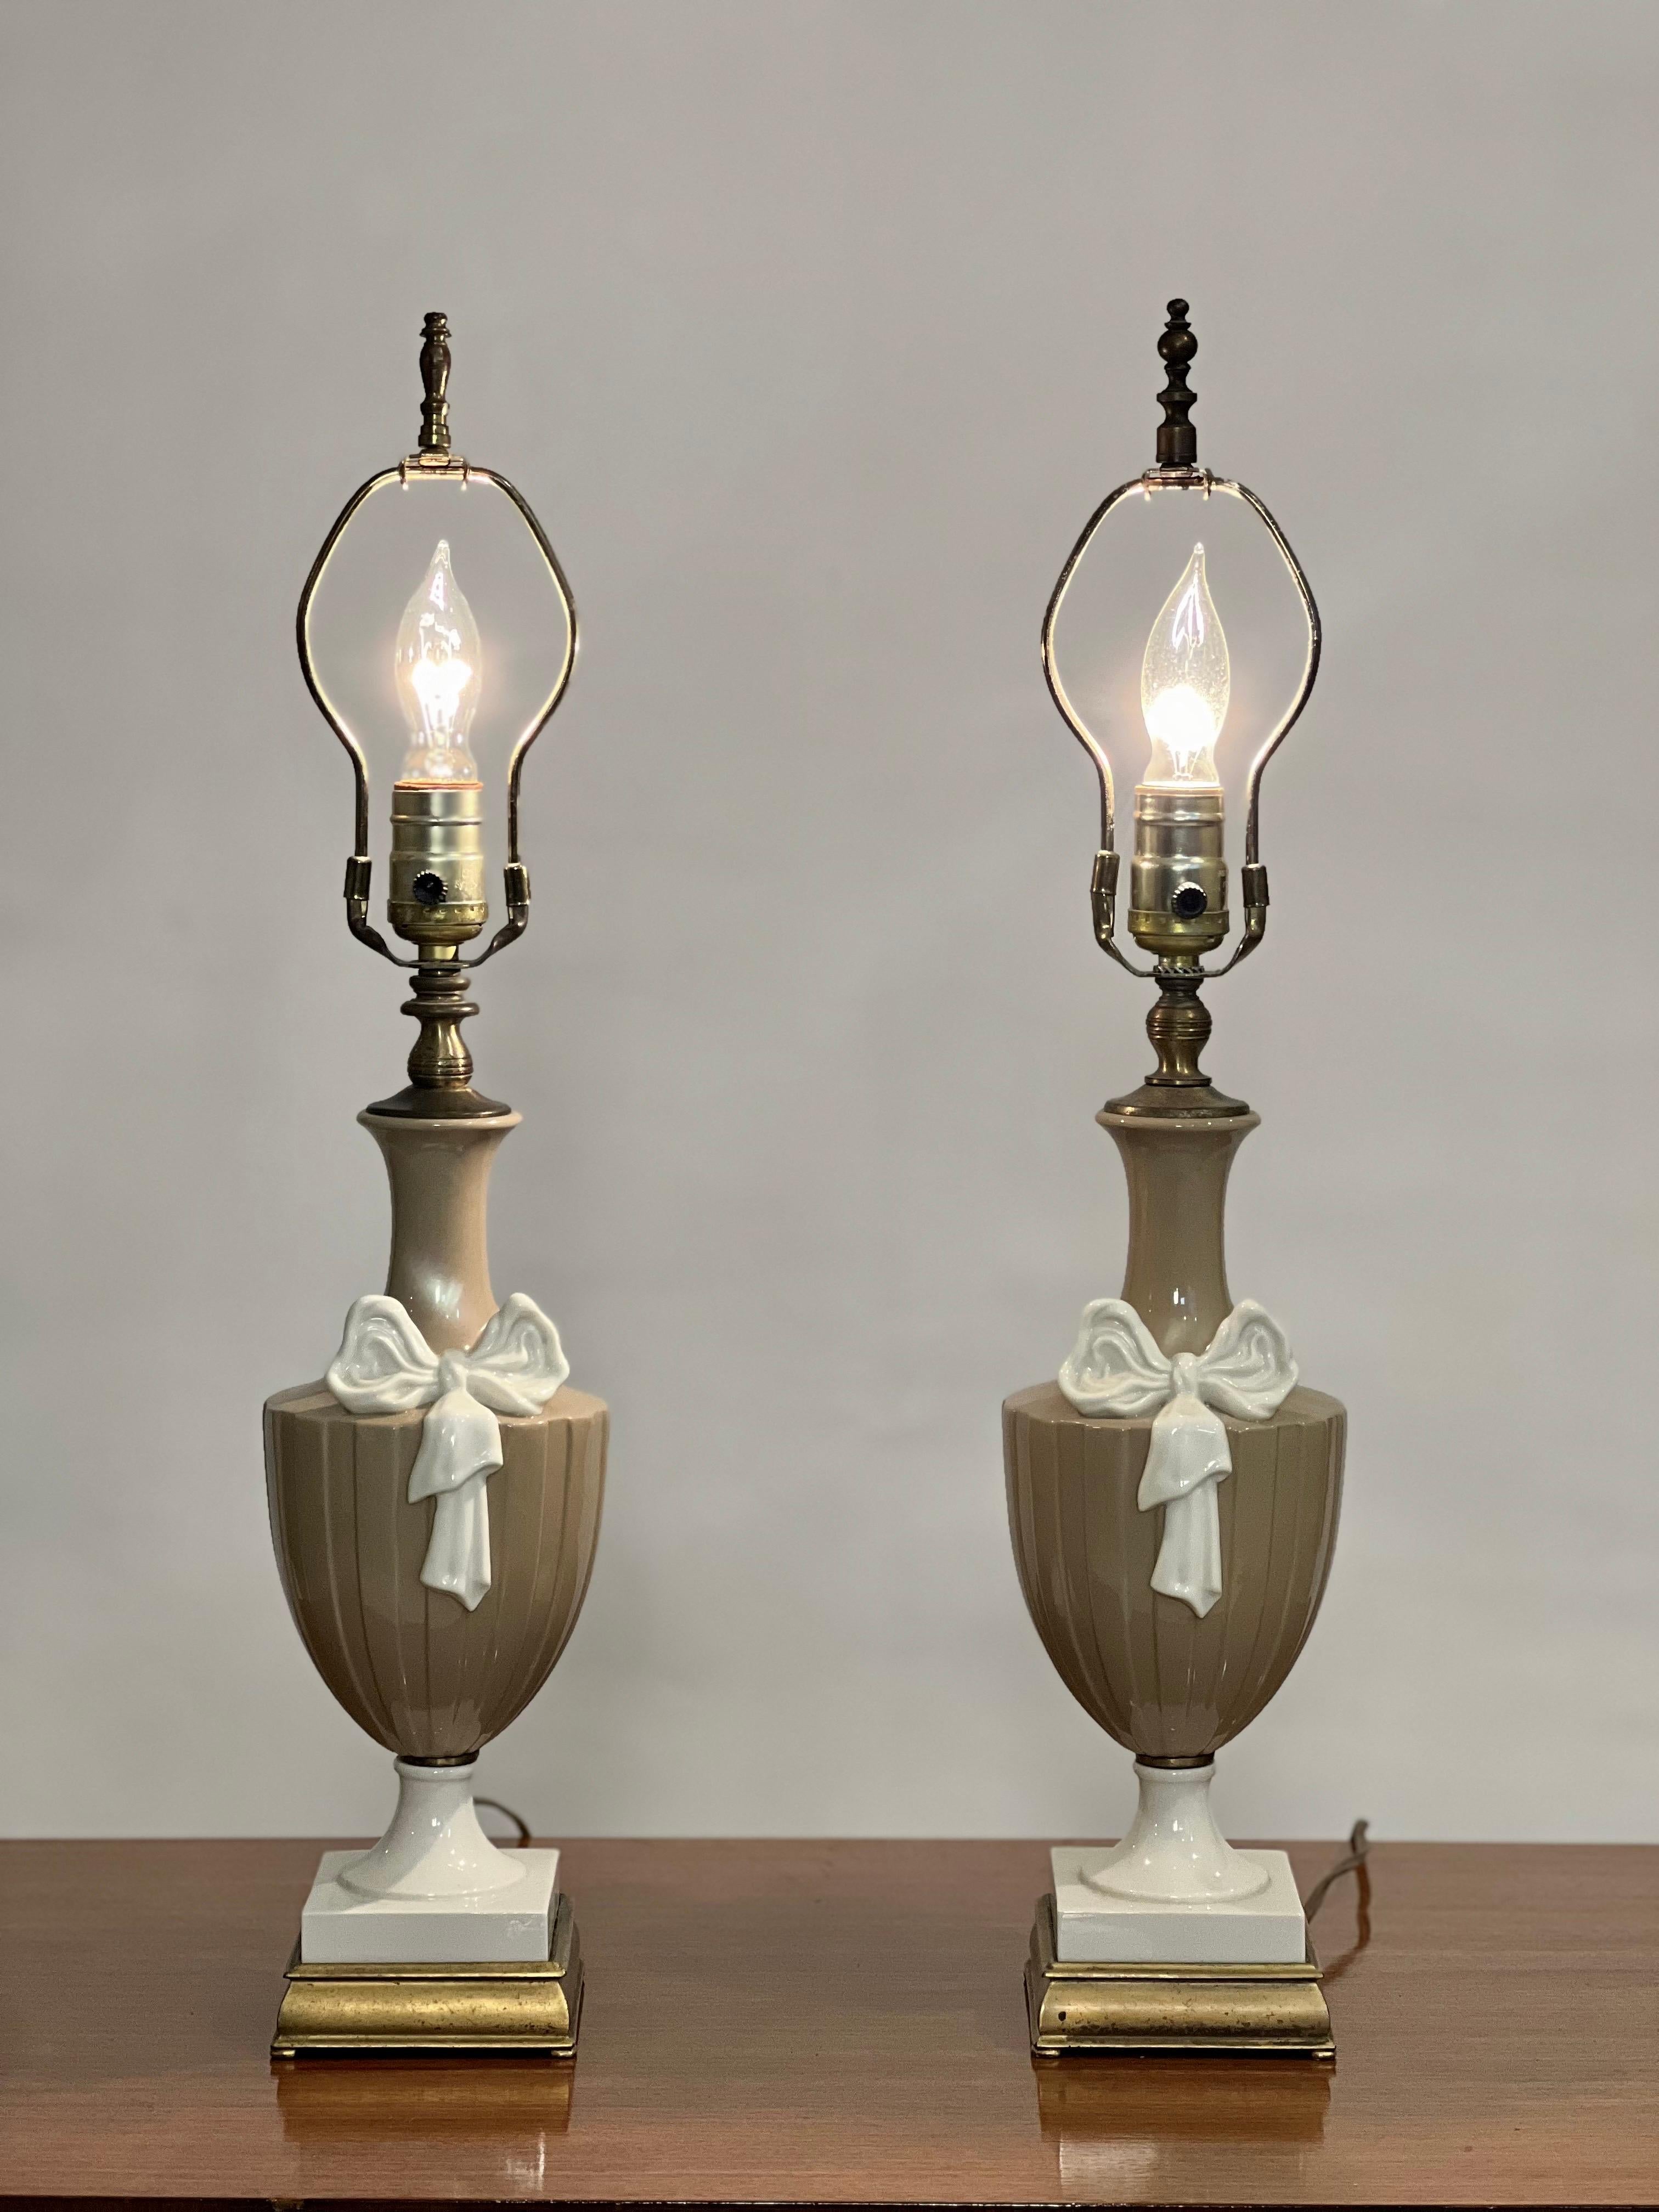 20th Century Lenox Porcelain Lamps in Taupe and White by Dav Art, NY, Pair For Sale 3